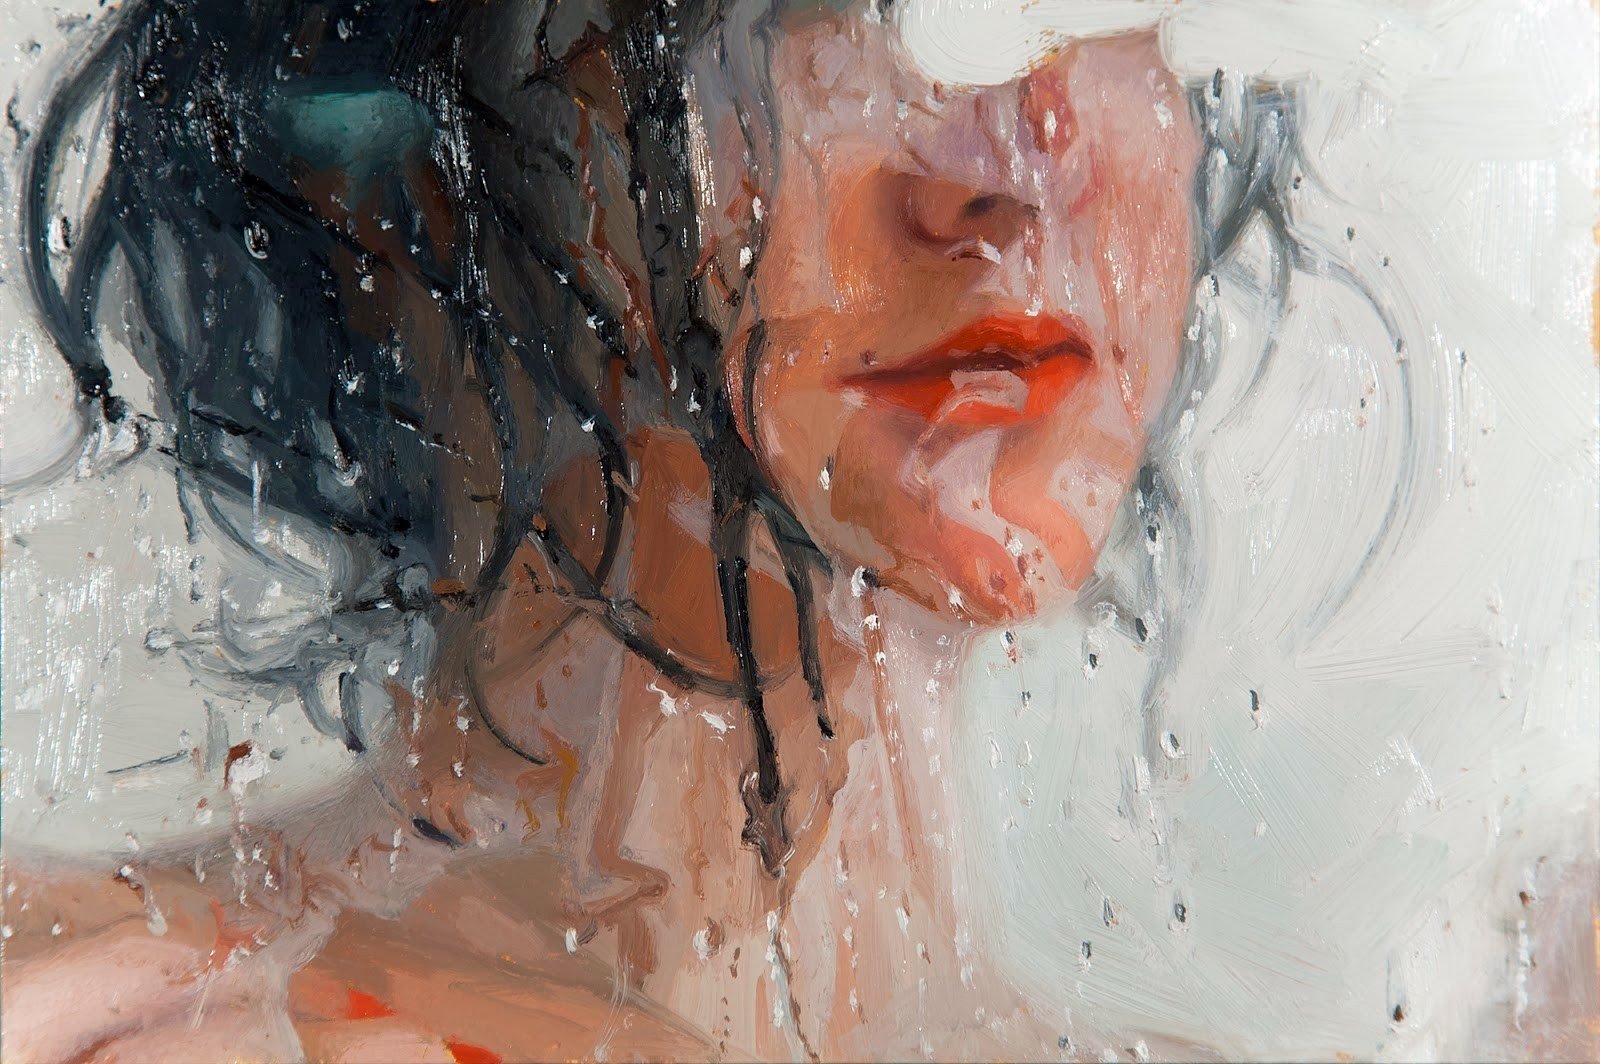 Painting Alyssa Monks Hd Wallpapers Desktop And Mobile Images Photos